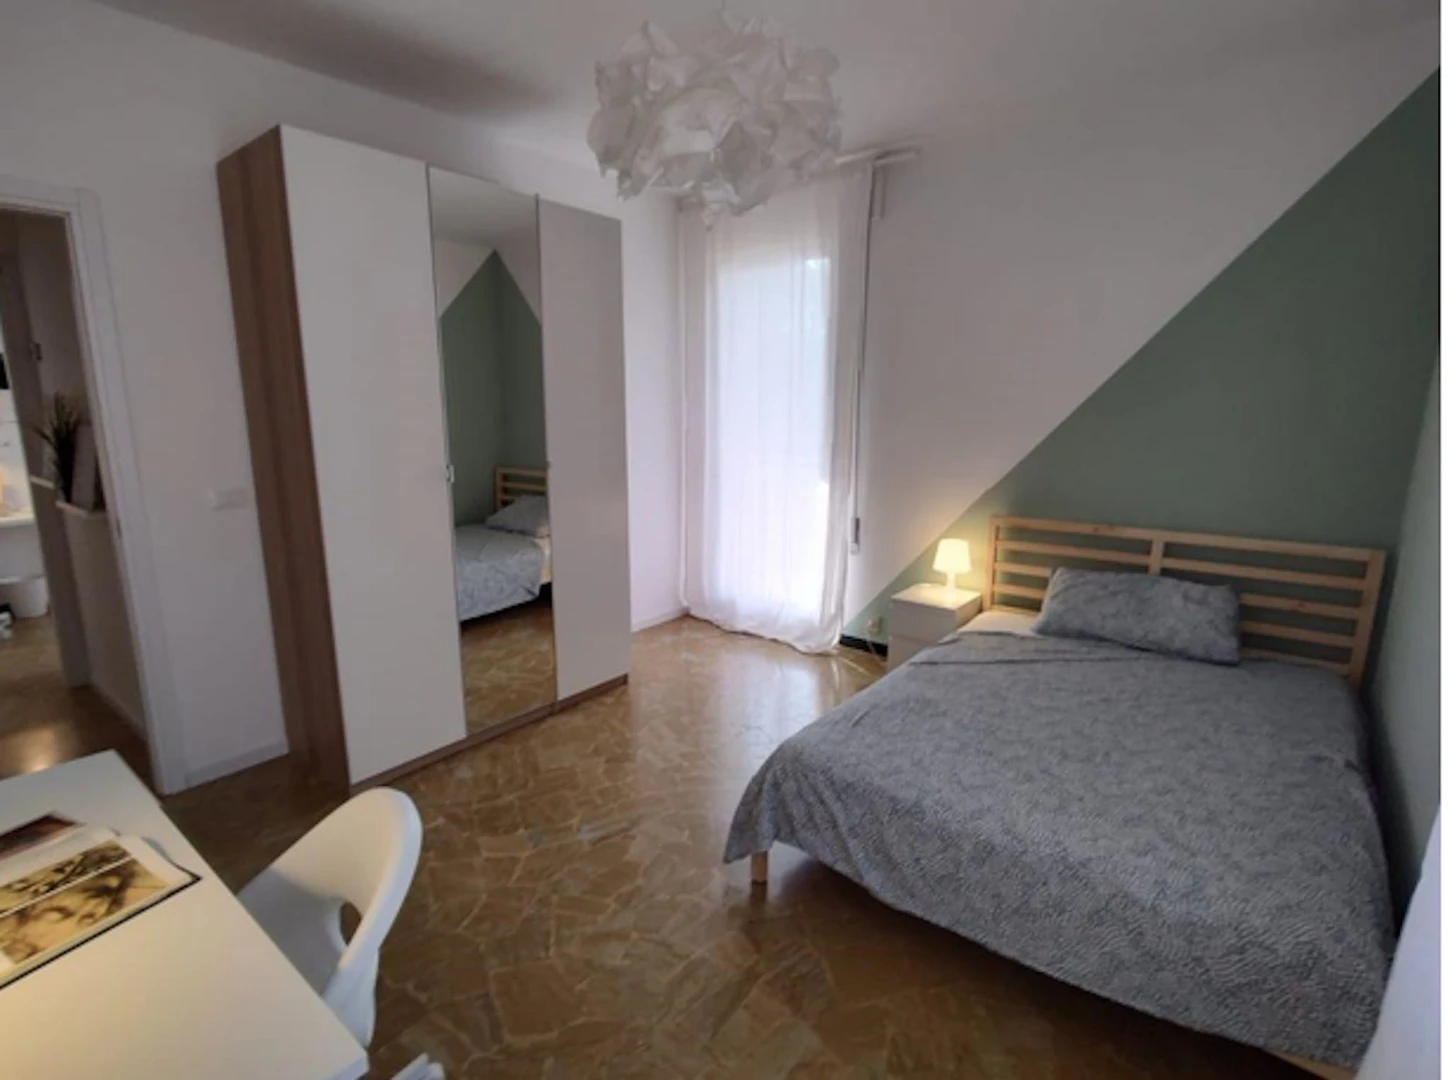 Room for rent with double bed padova